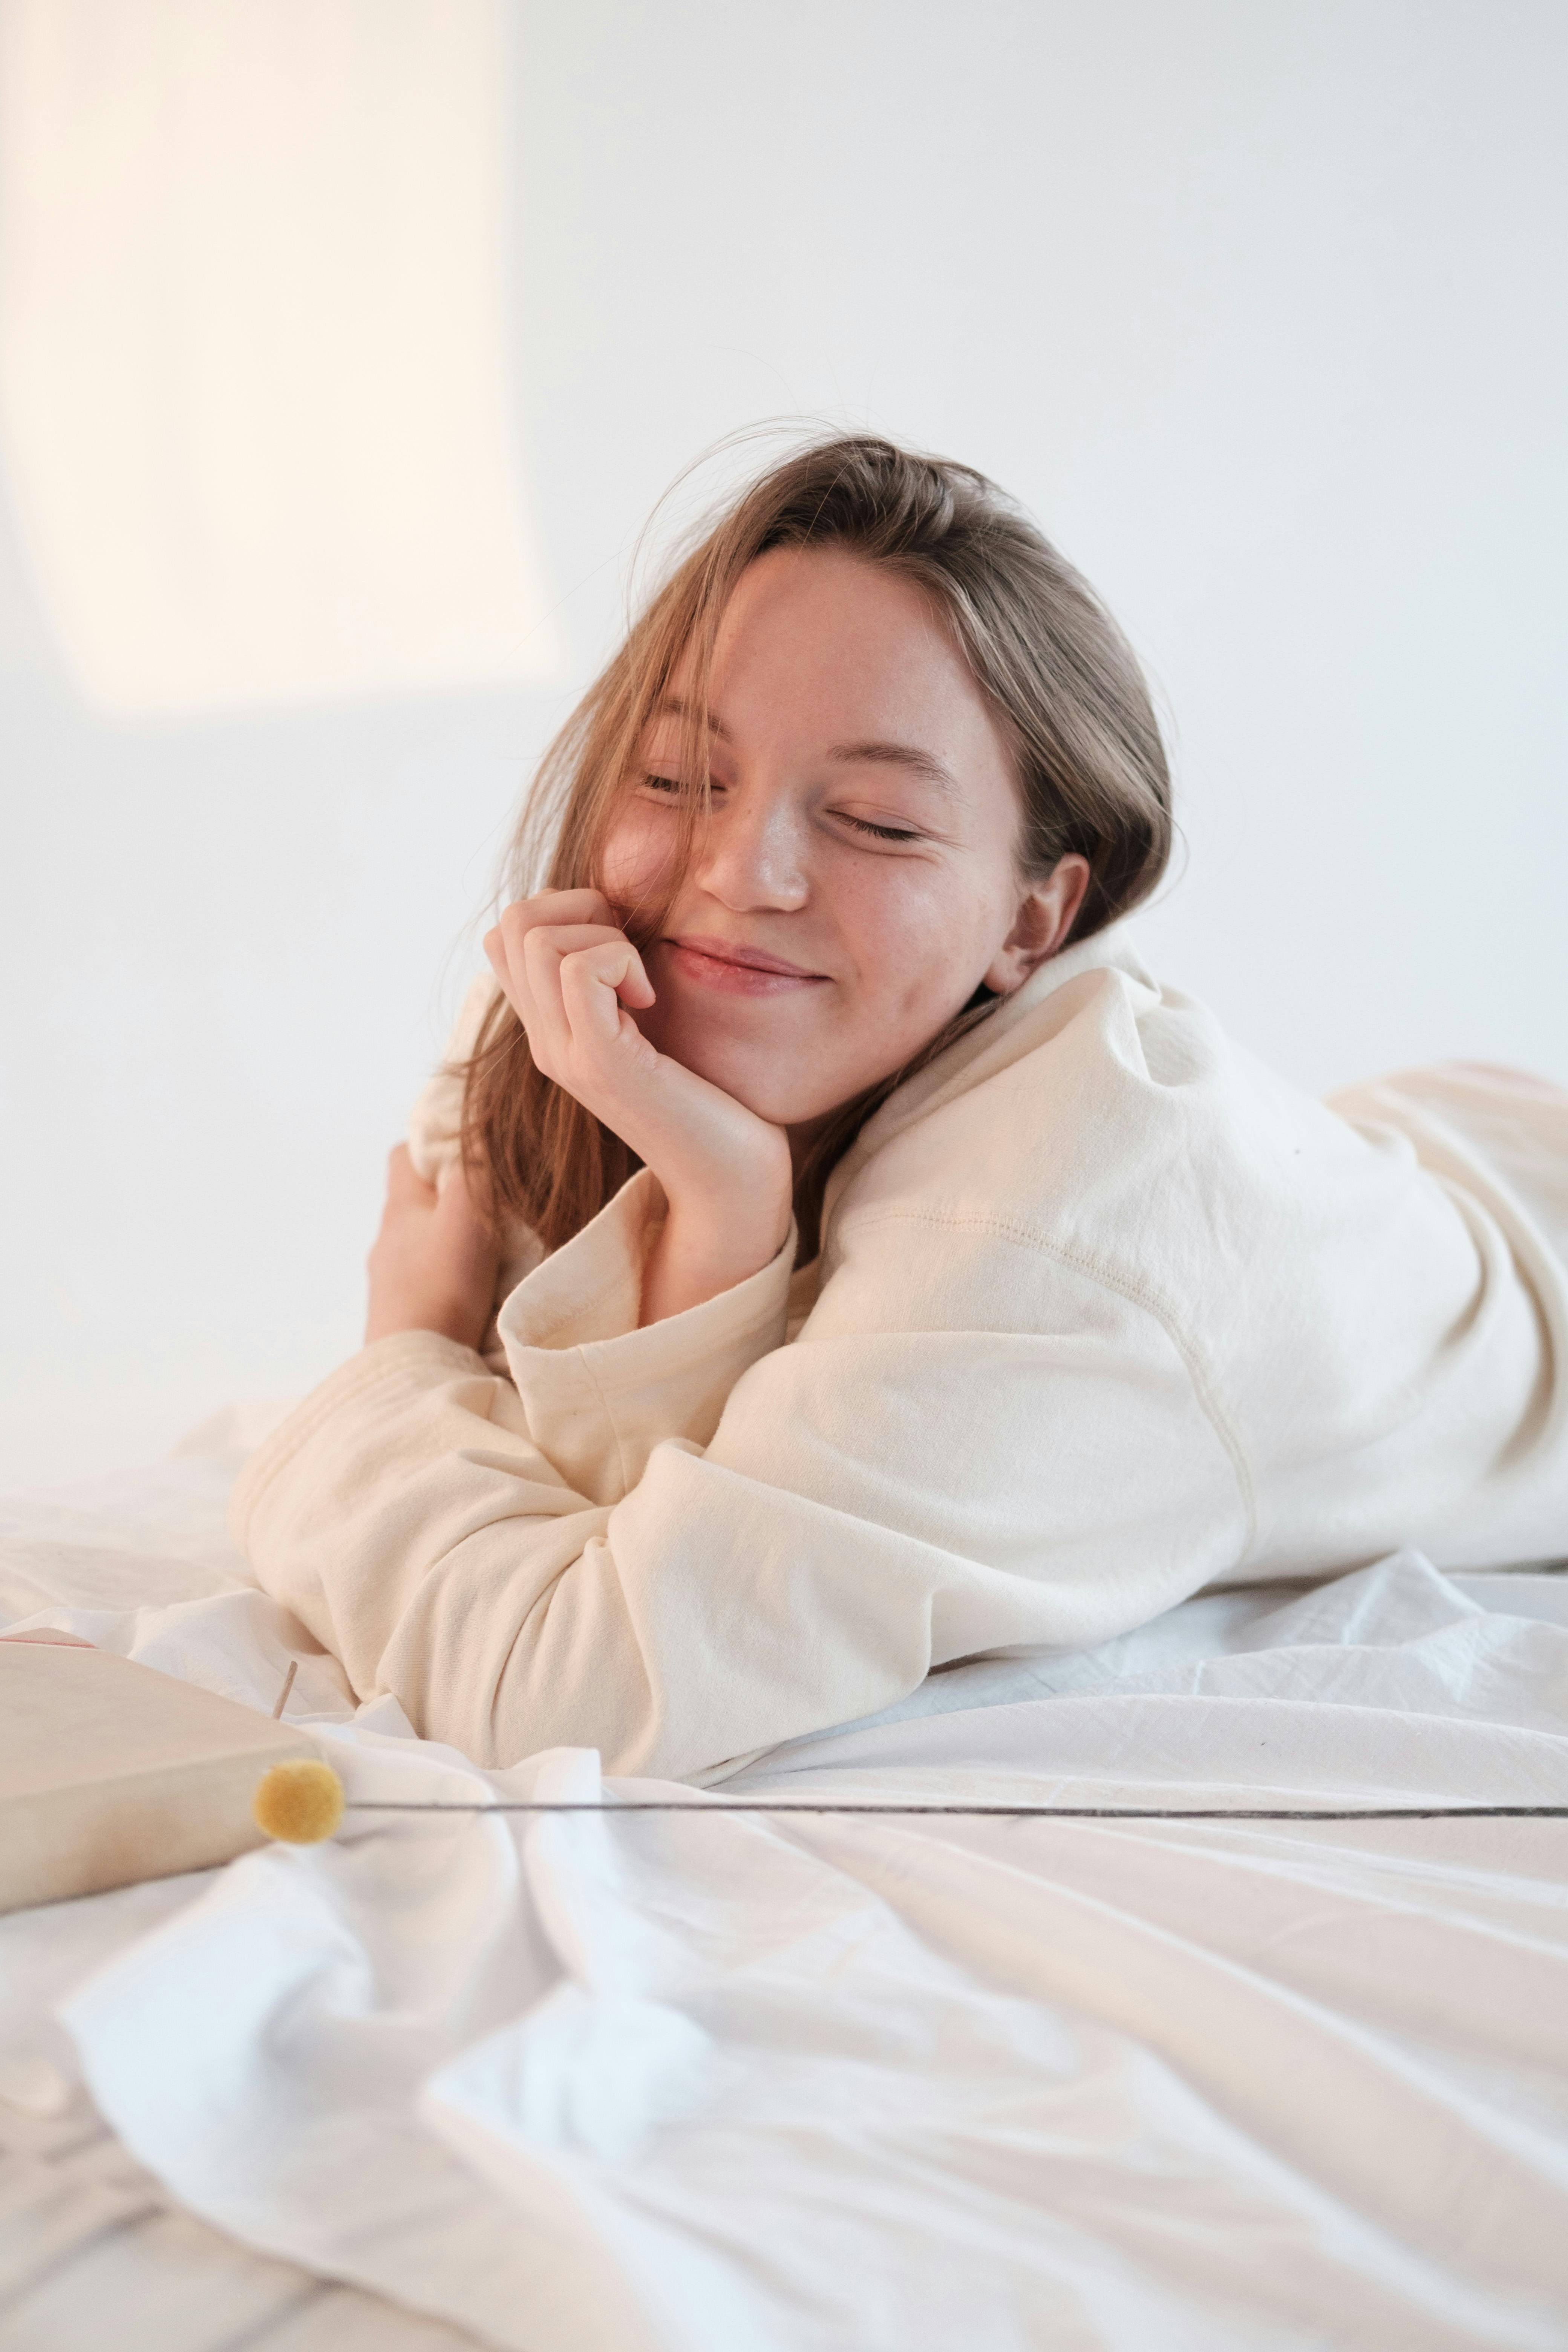 A happy woman lying on a bed | Source: Pexels